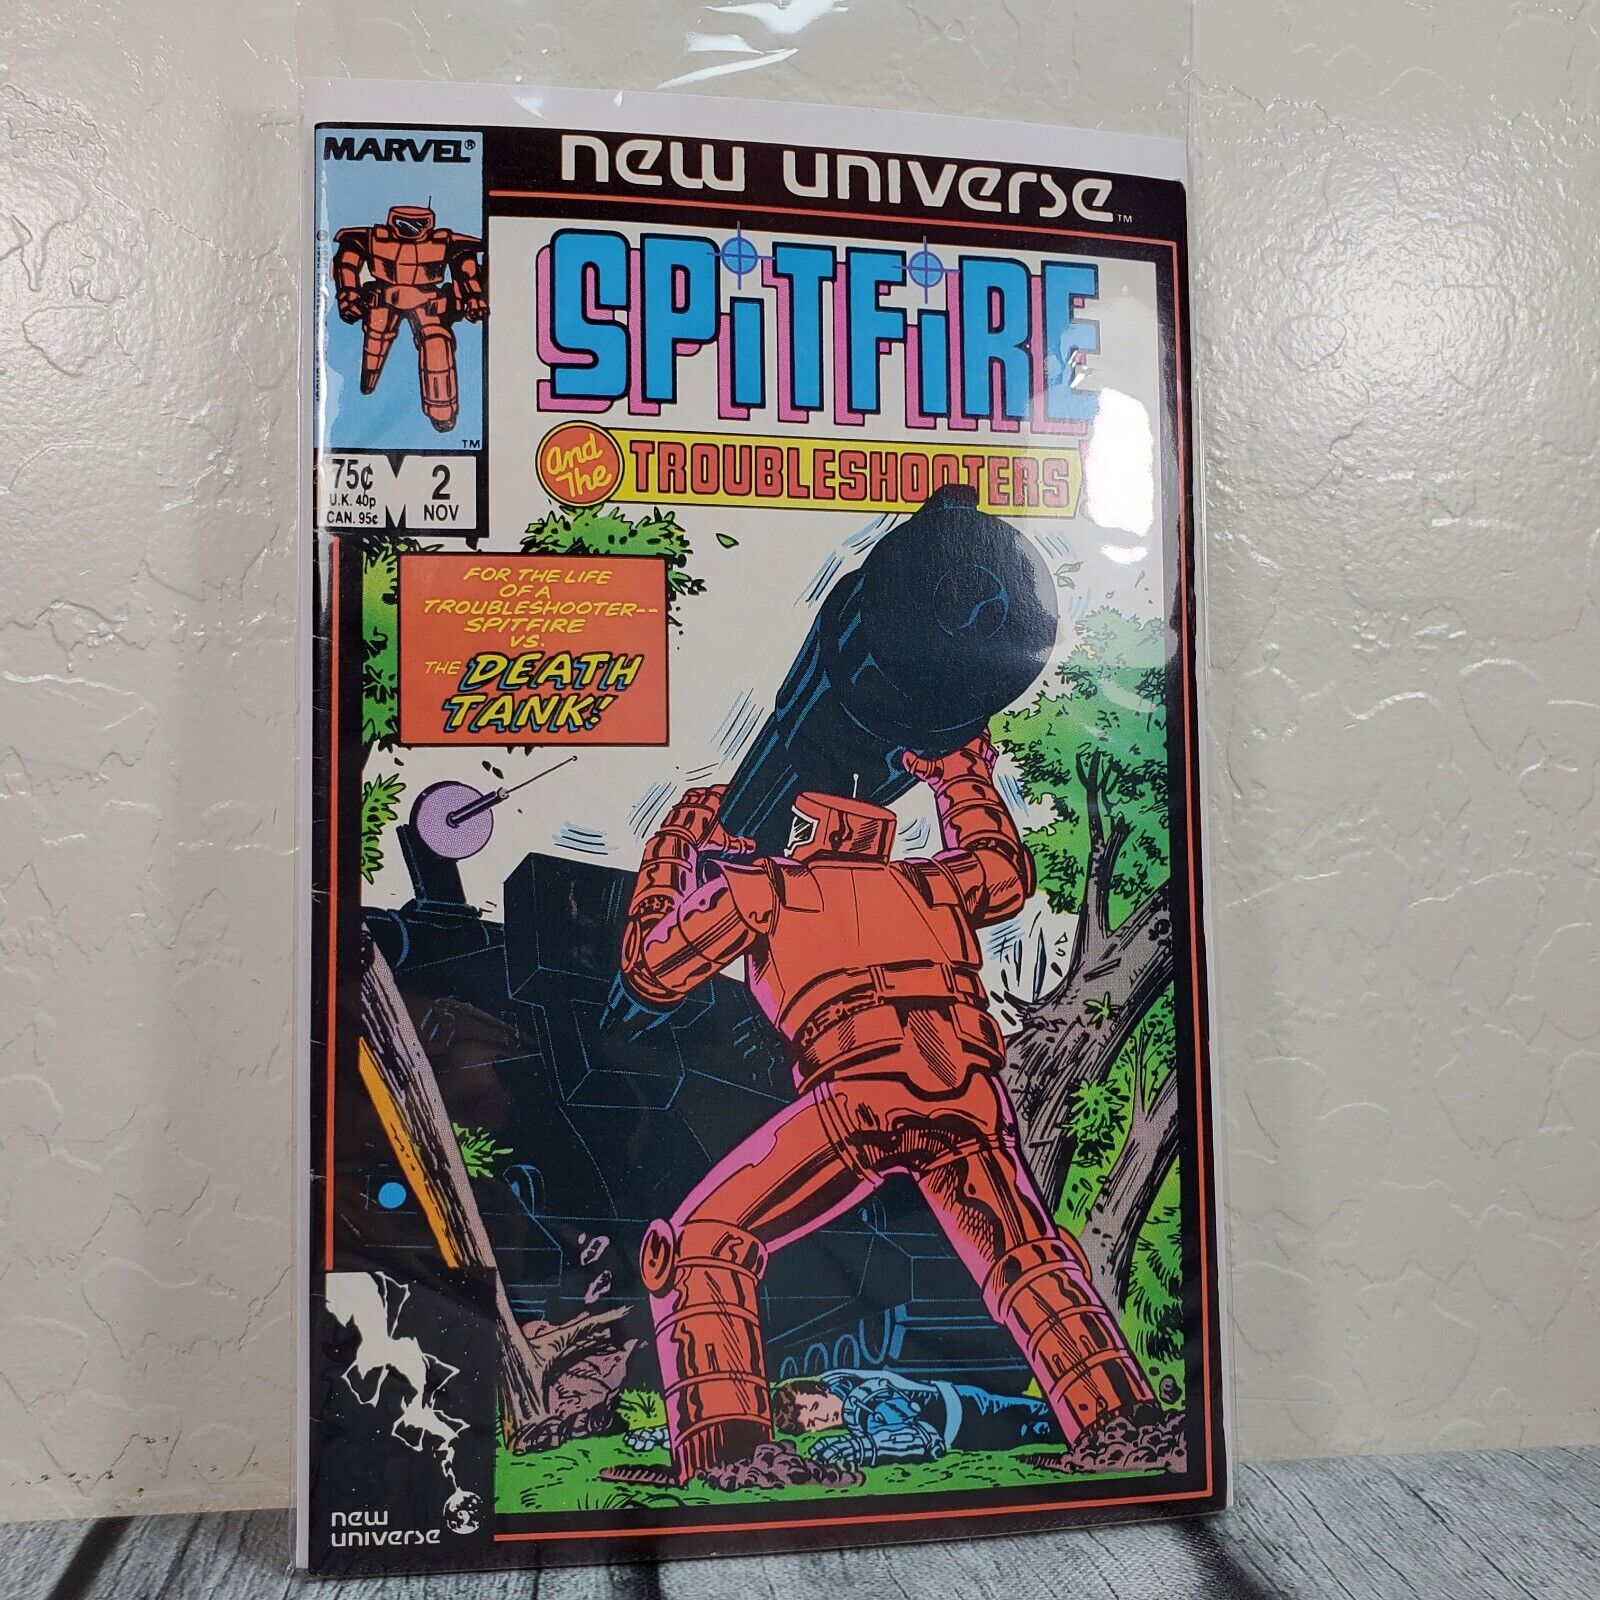 Marvel Comics Spitfire And The Troubleshooters #2 1986 Vol. 1 Vintage Comic Book